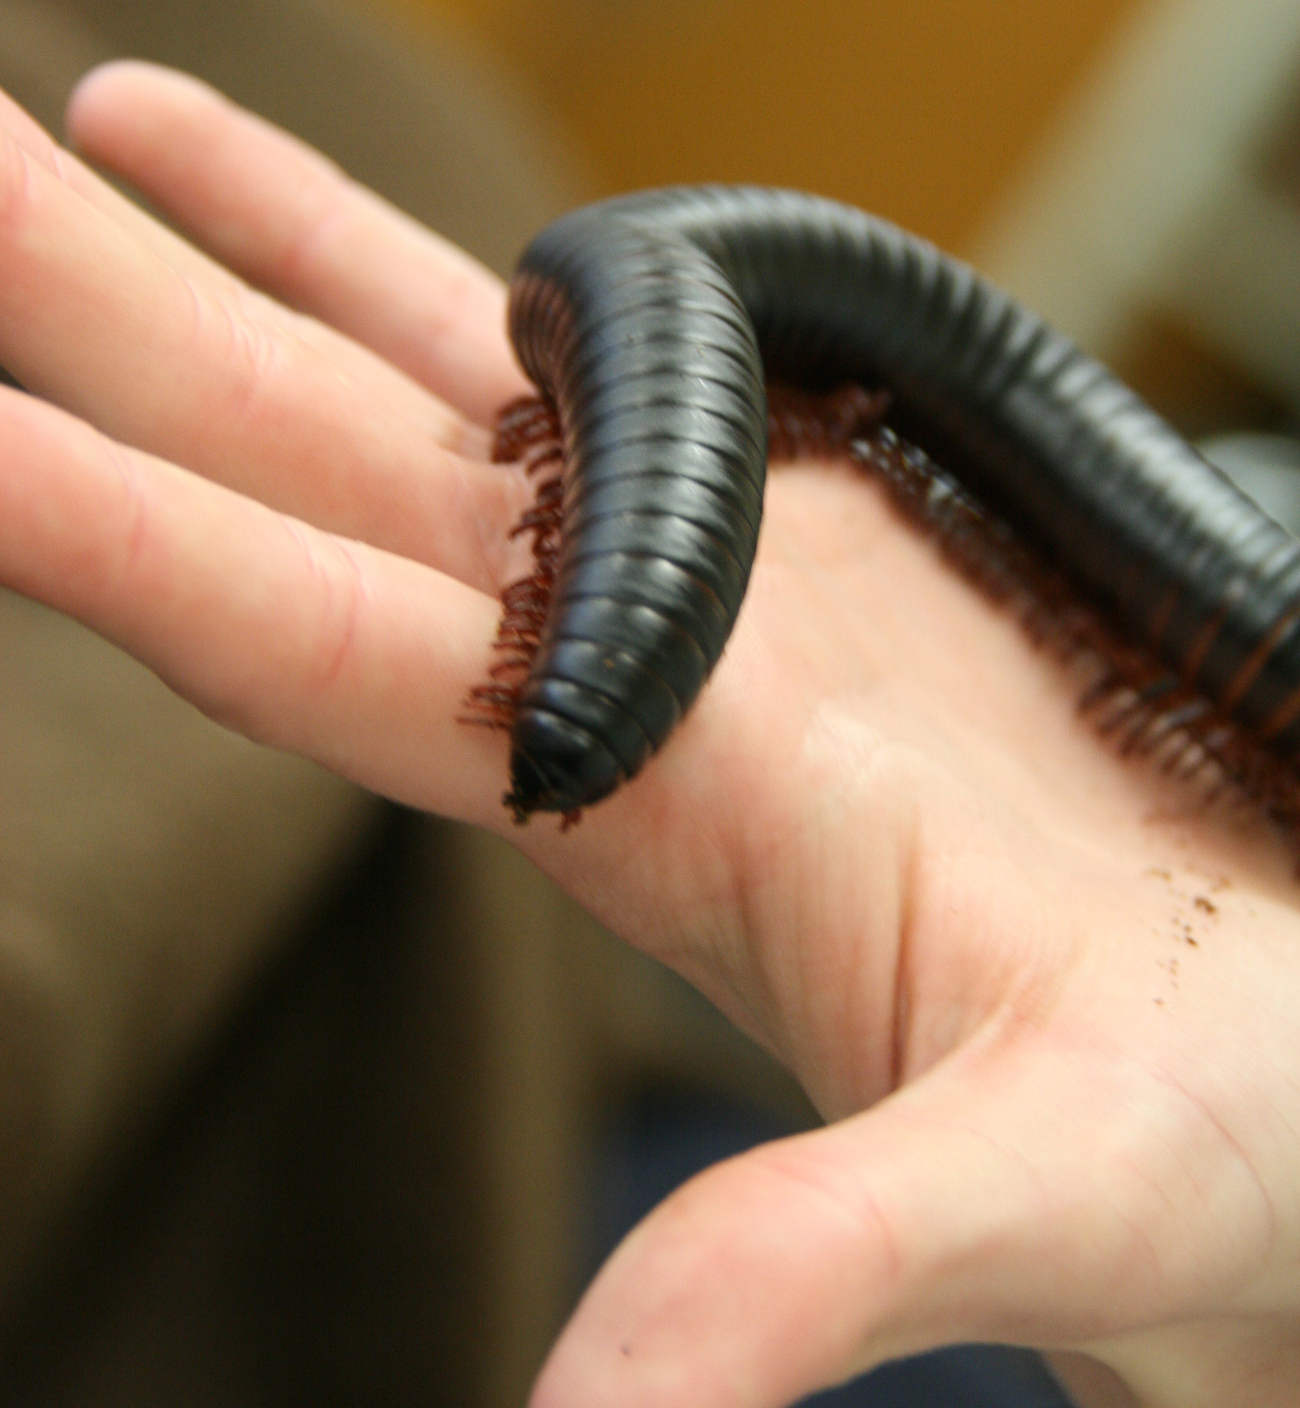 Giant millipede resting on a person's hand